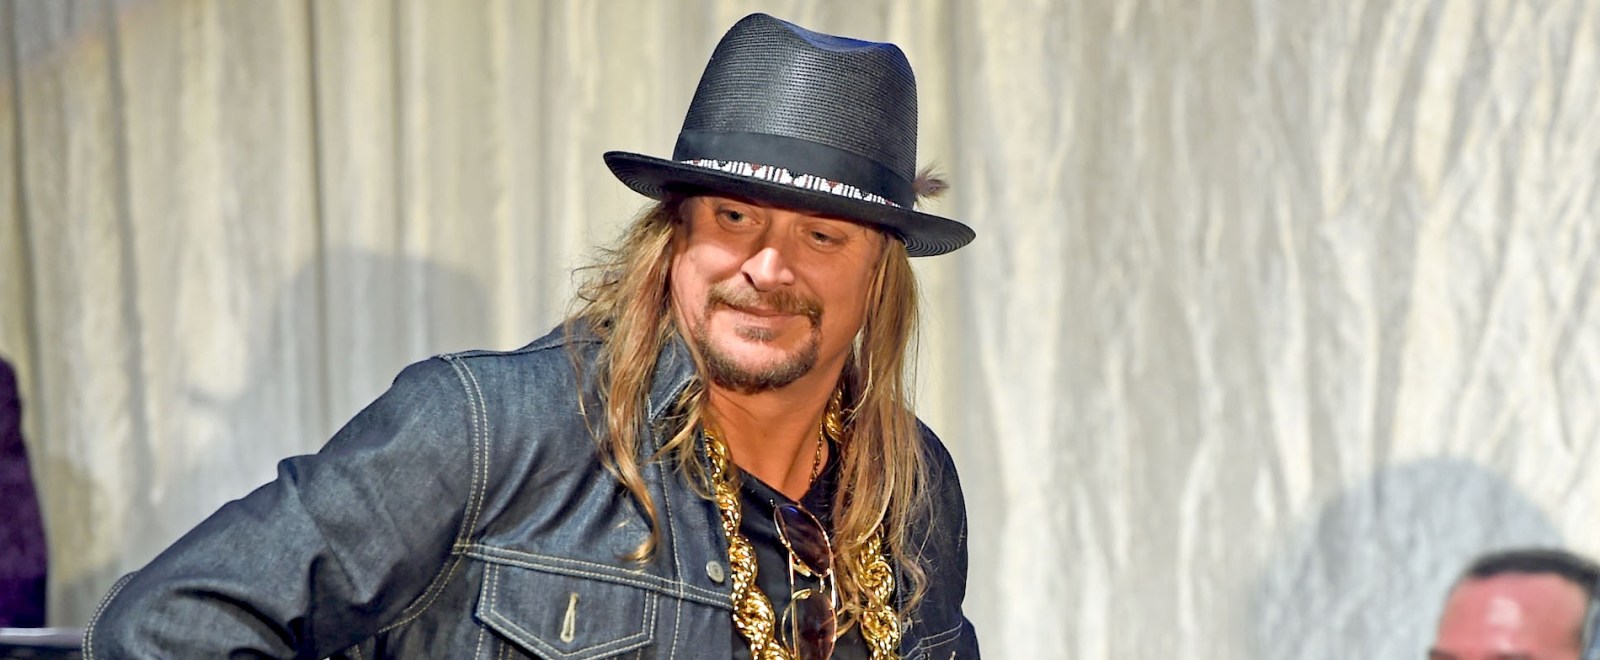 Kid Rock Addresses His Use Of A Homophobic Slur By Repeating The Word